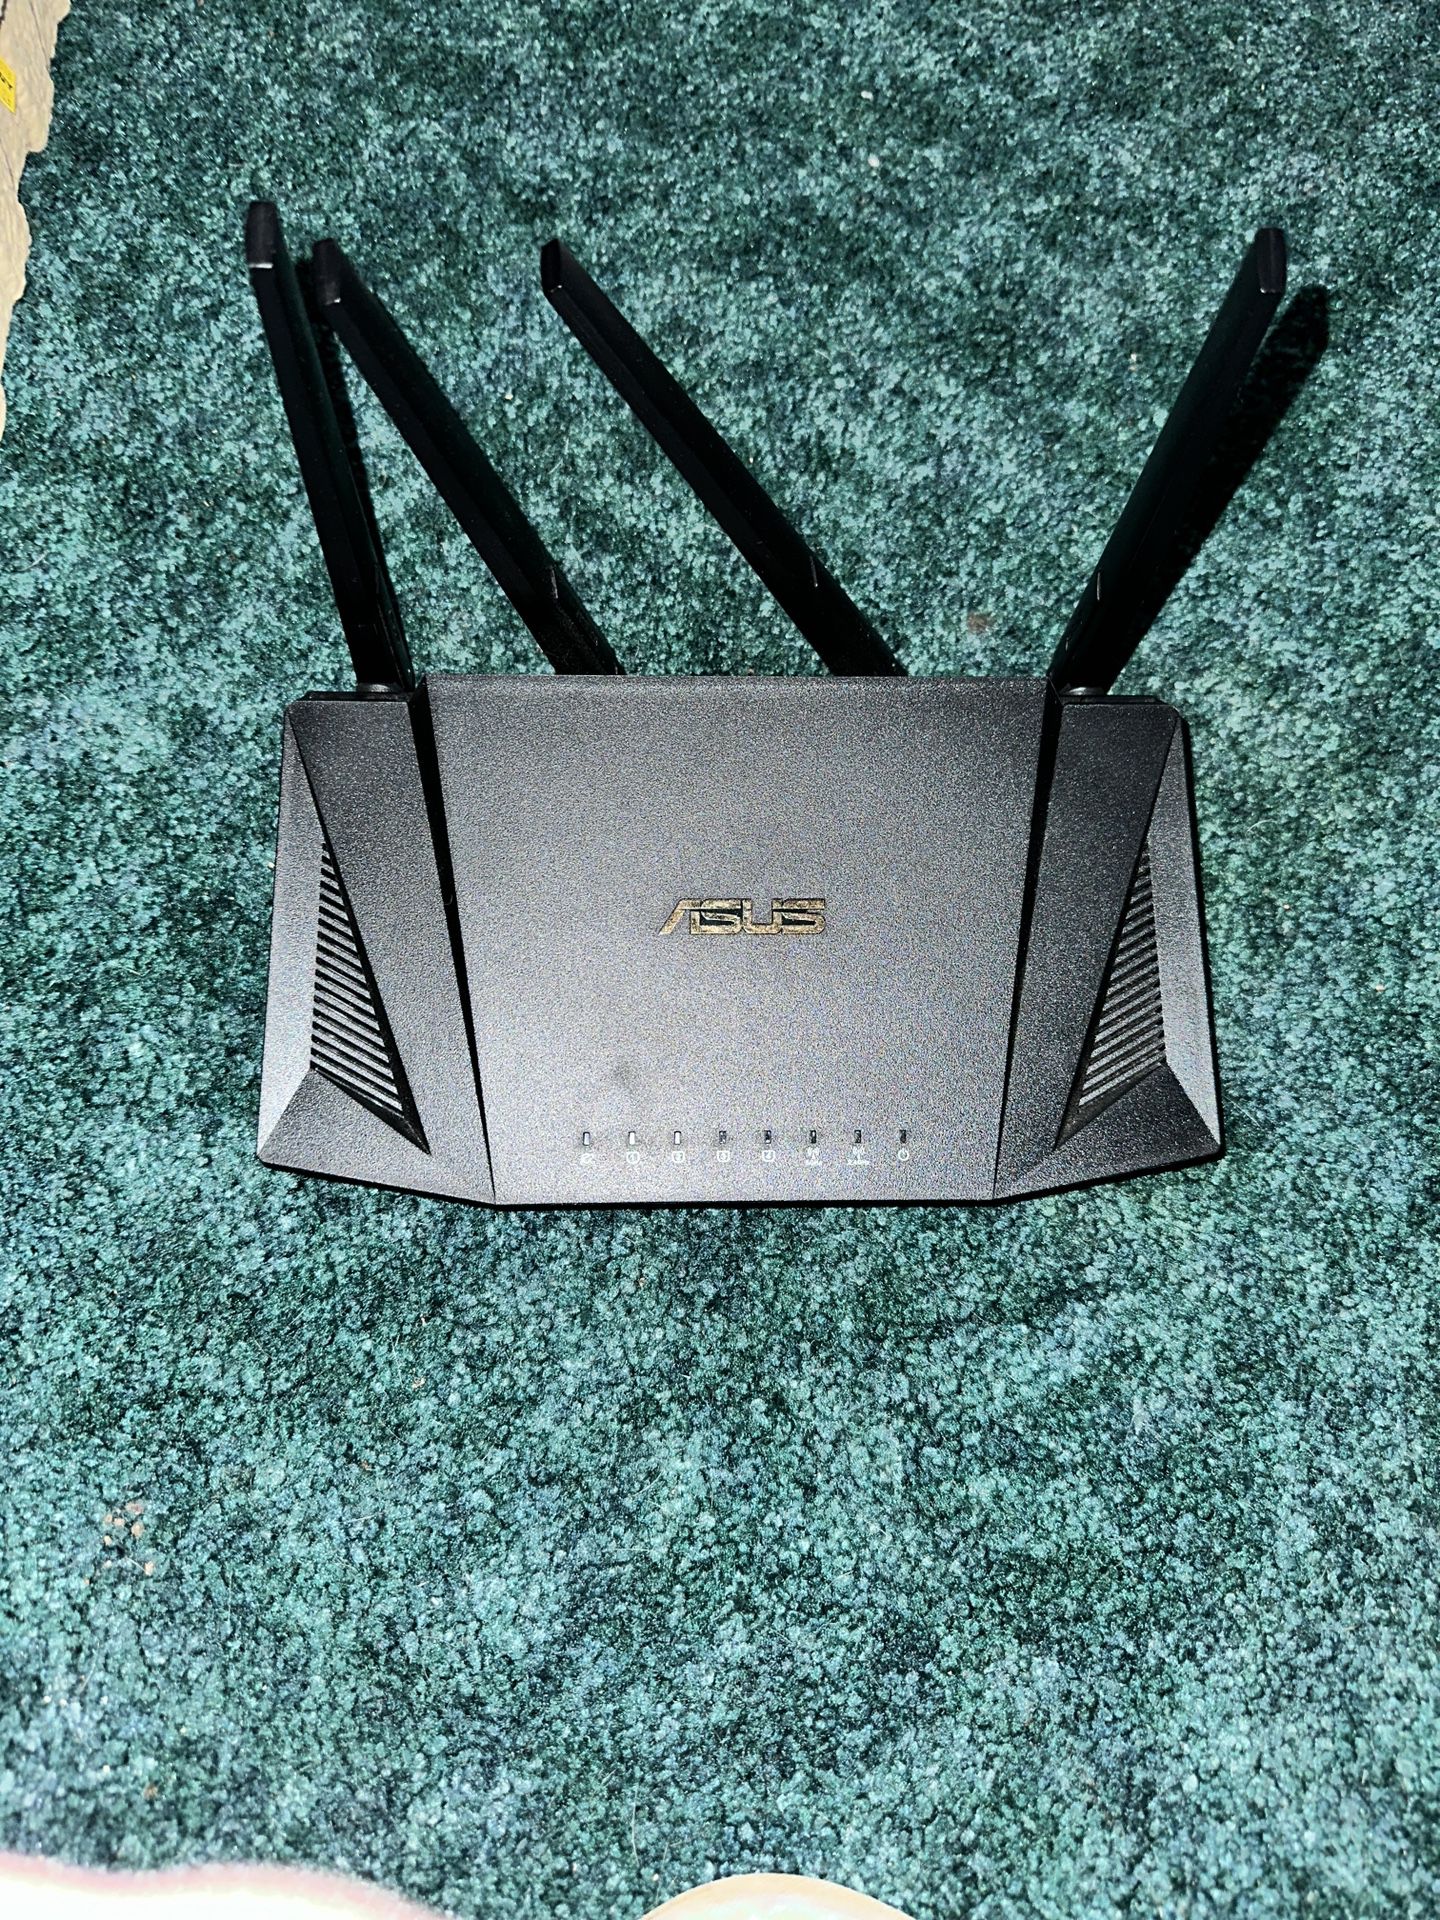 asus wifi router 